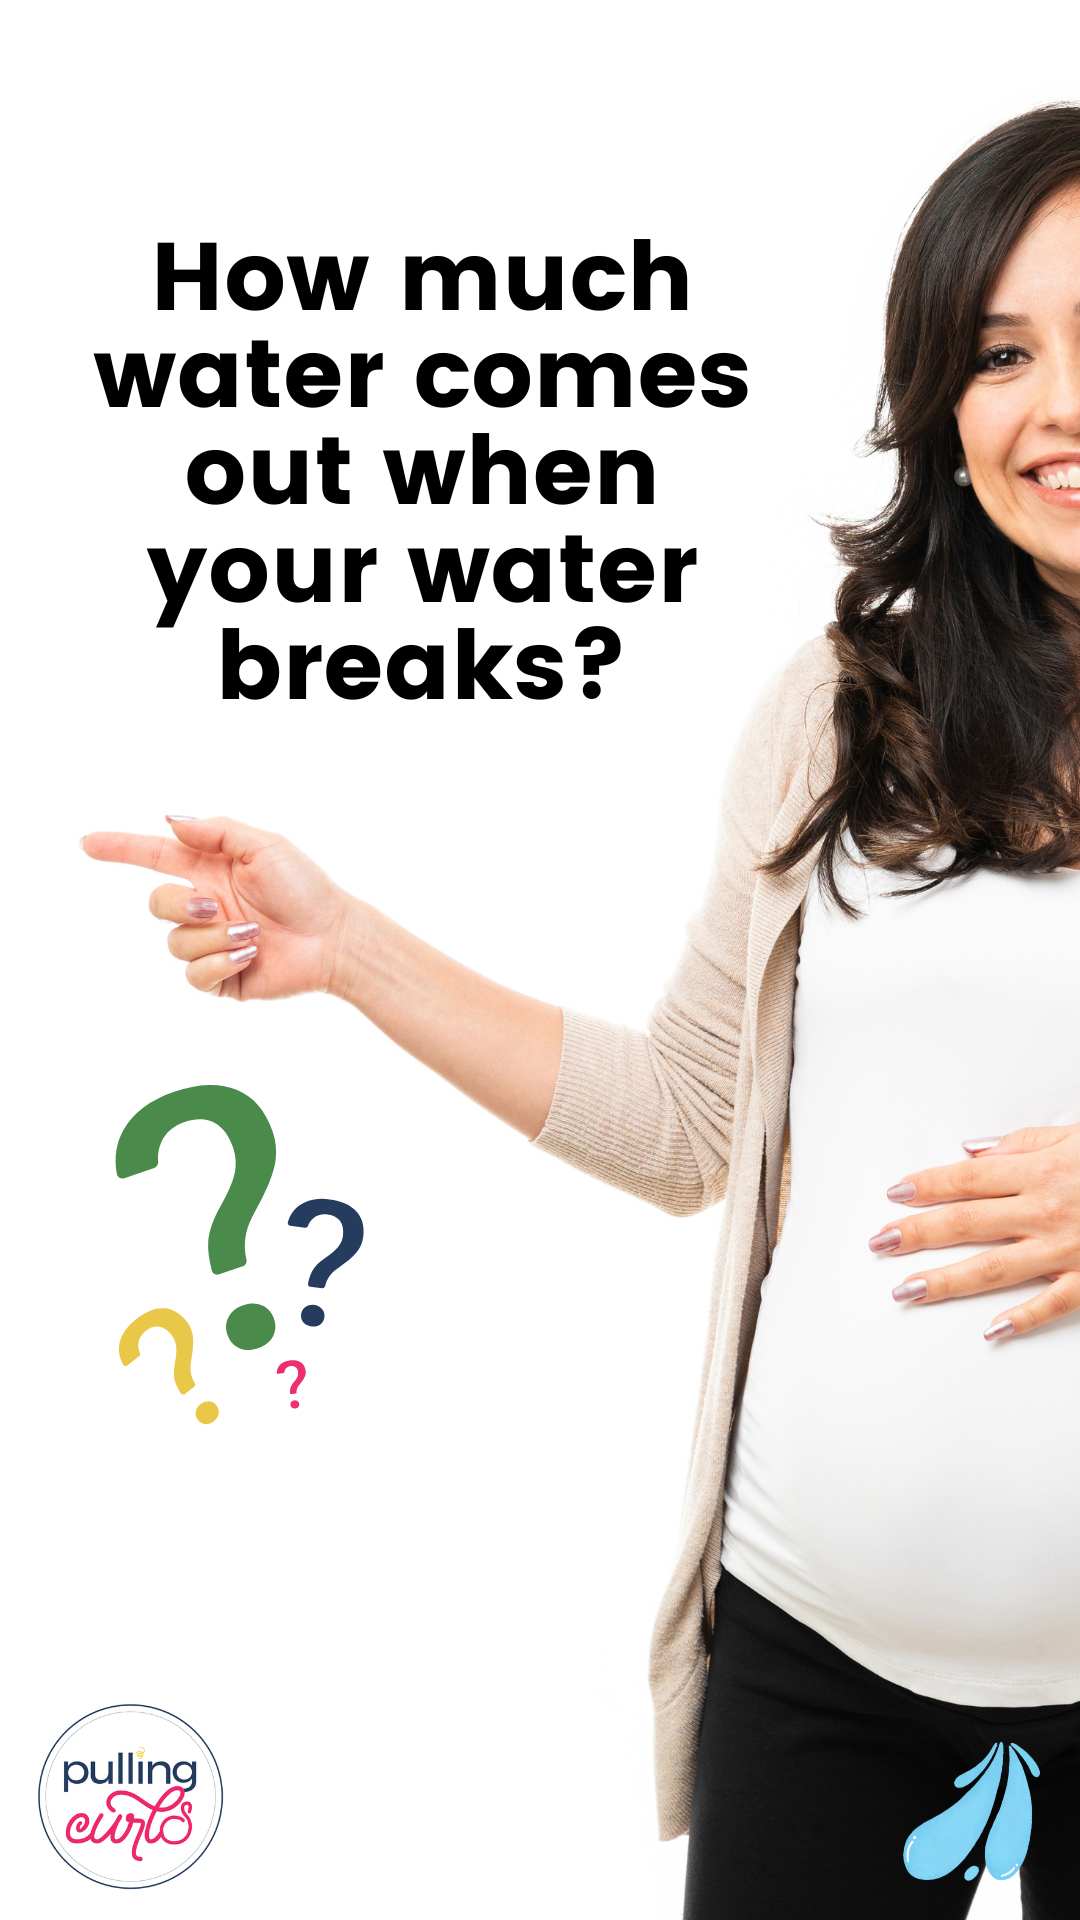 Think you know everything about your water breaking? Discover the surprising truth from The Pregnancy Nurse and debunk the myths surrounding this mysterious event in pregnancy. via @pullingcurls